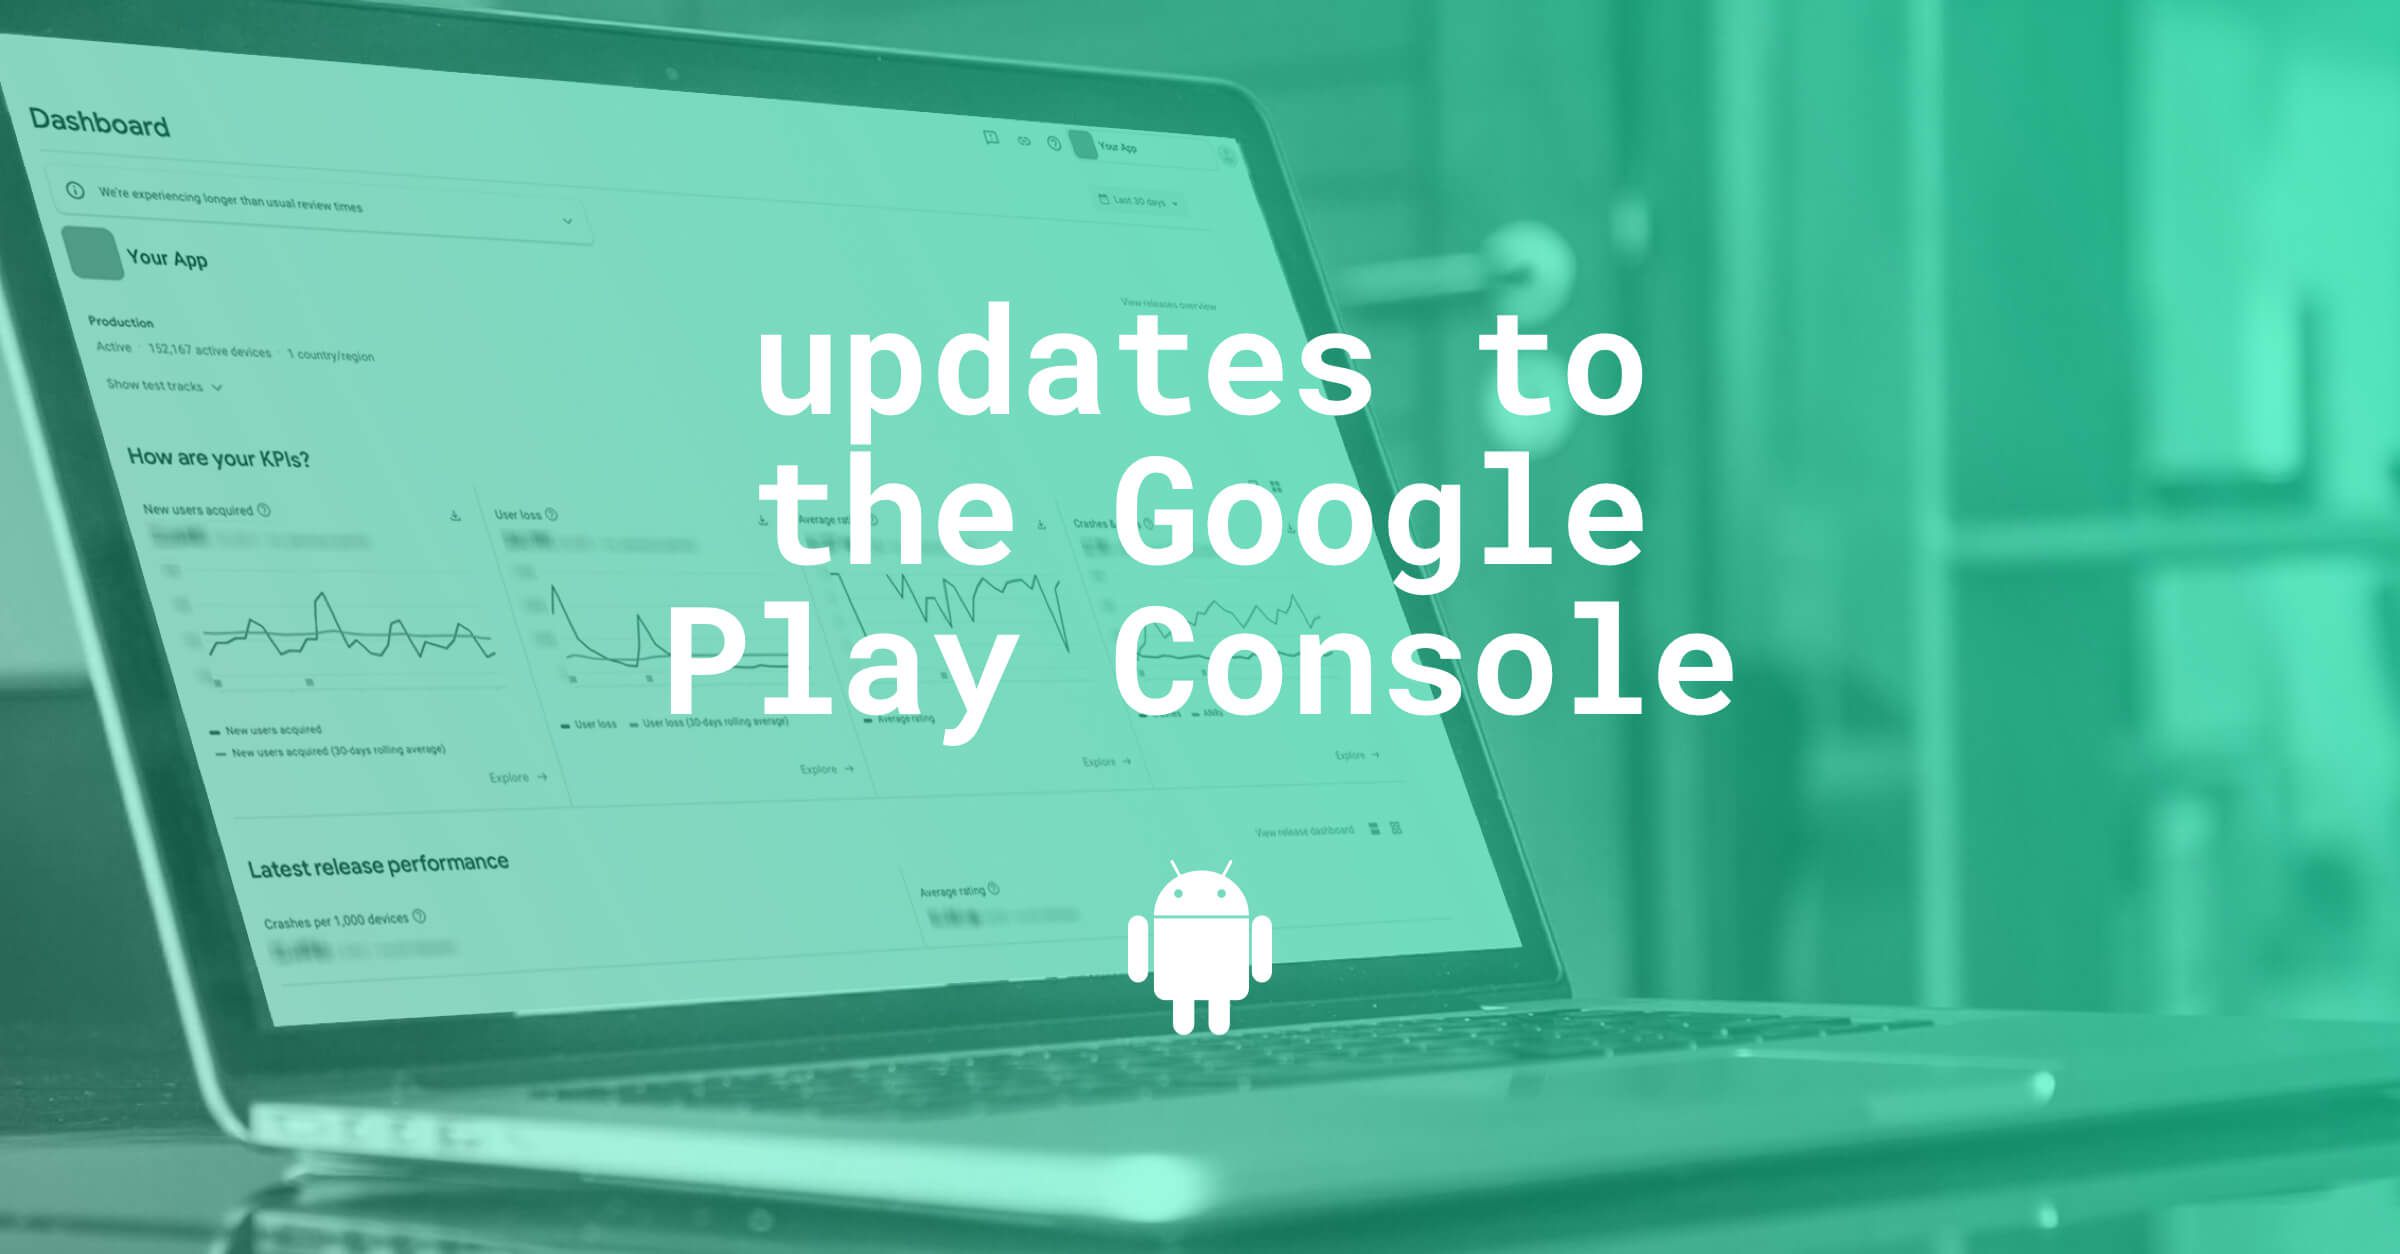 Updates to the Google Play Console impacting the Store presence and UA: All you need to know for your ASO strategy!